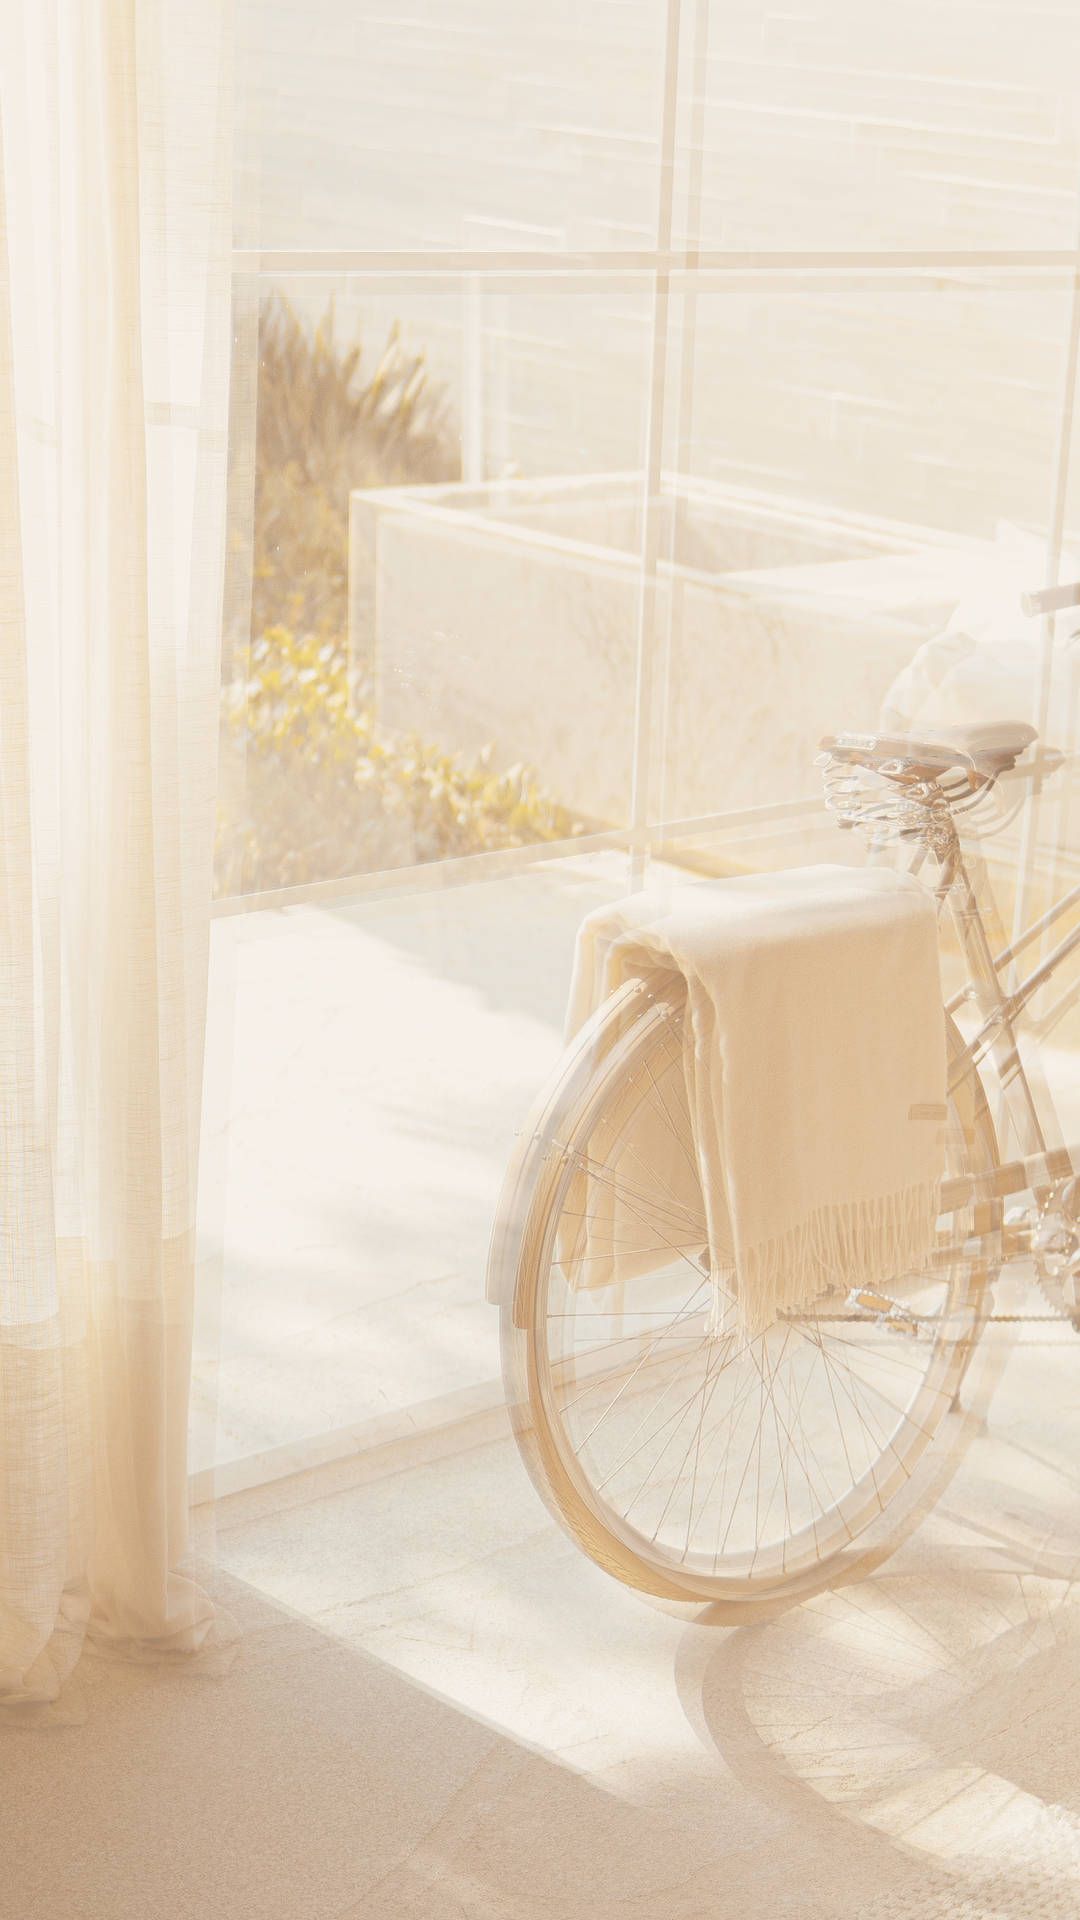 A white bicycle is parked next to a window with white curtains. - Cream